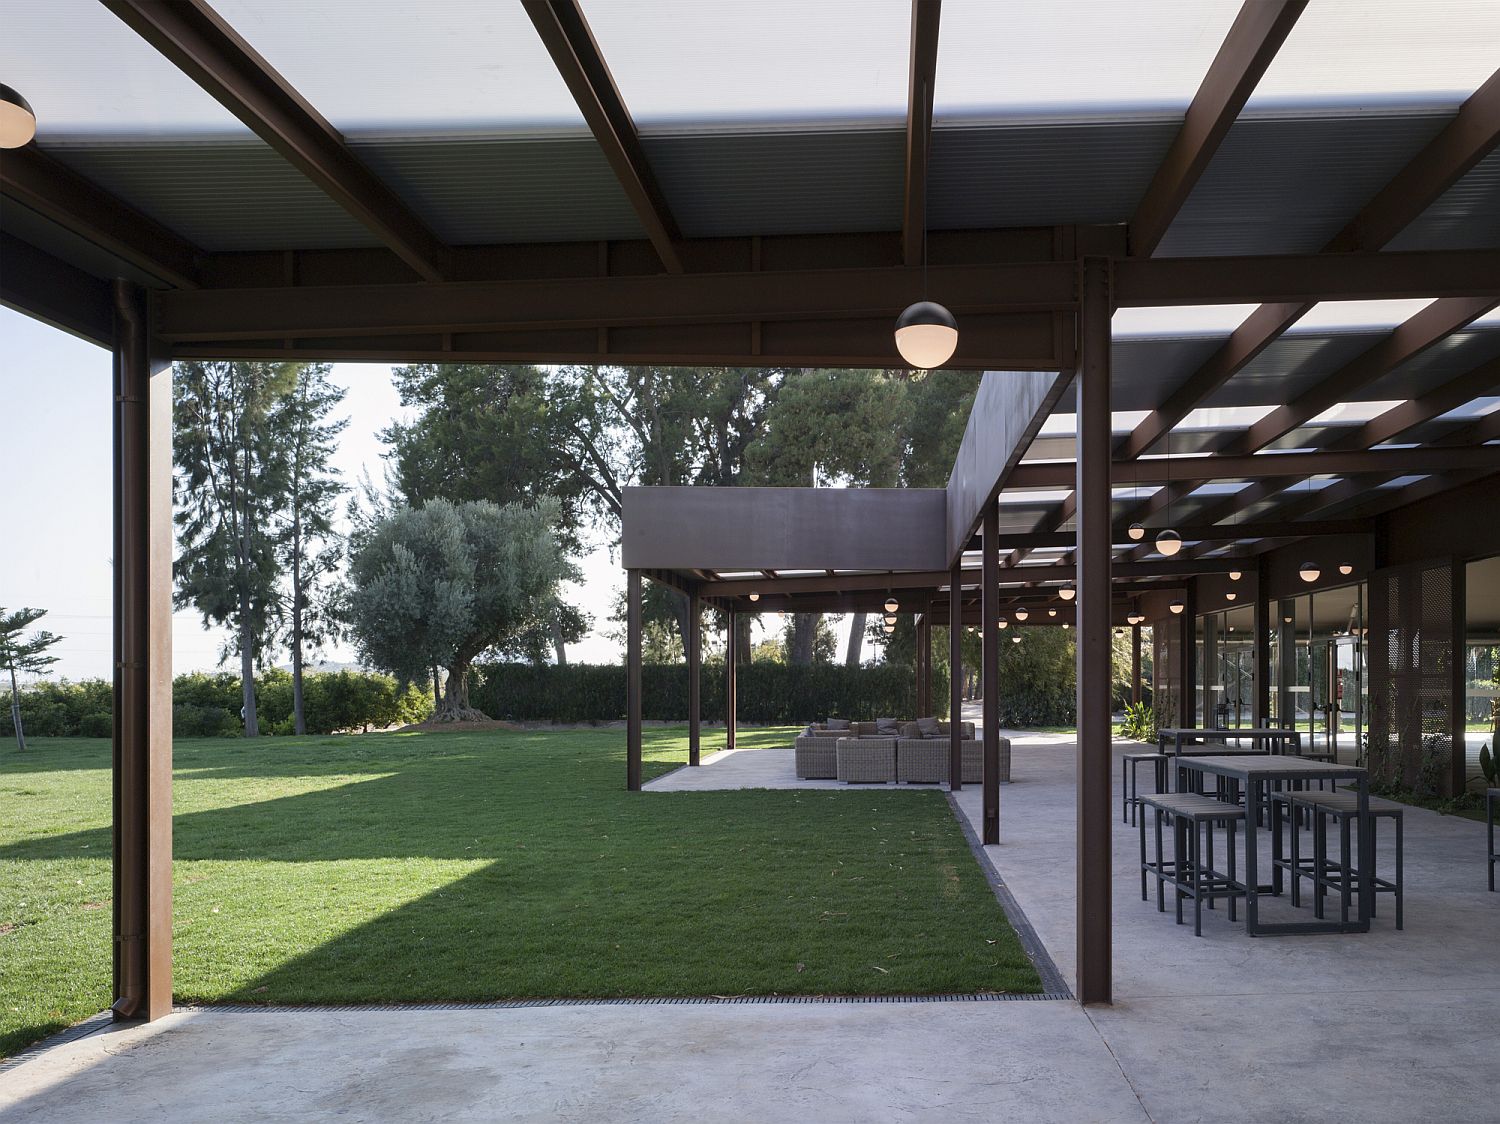 Space for outdoor events that keeps guests protected from the elements